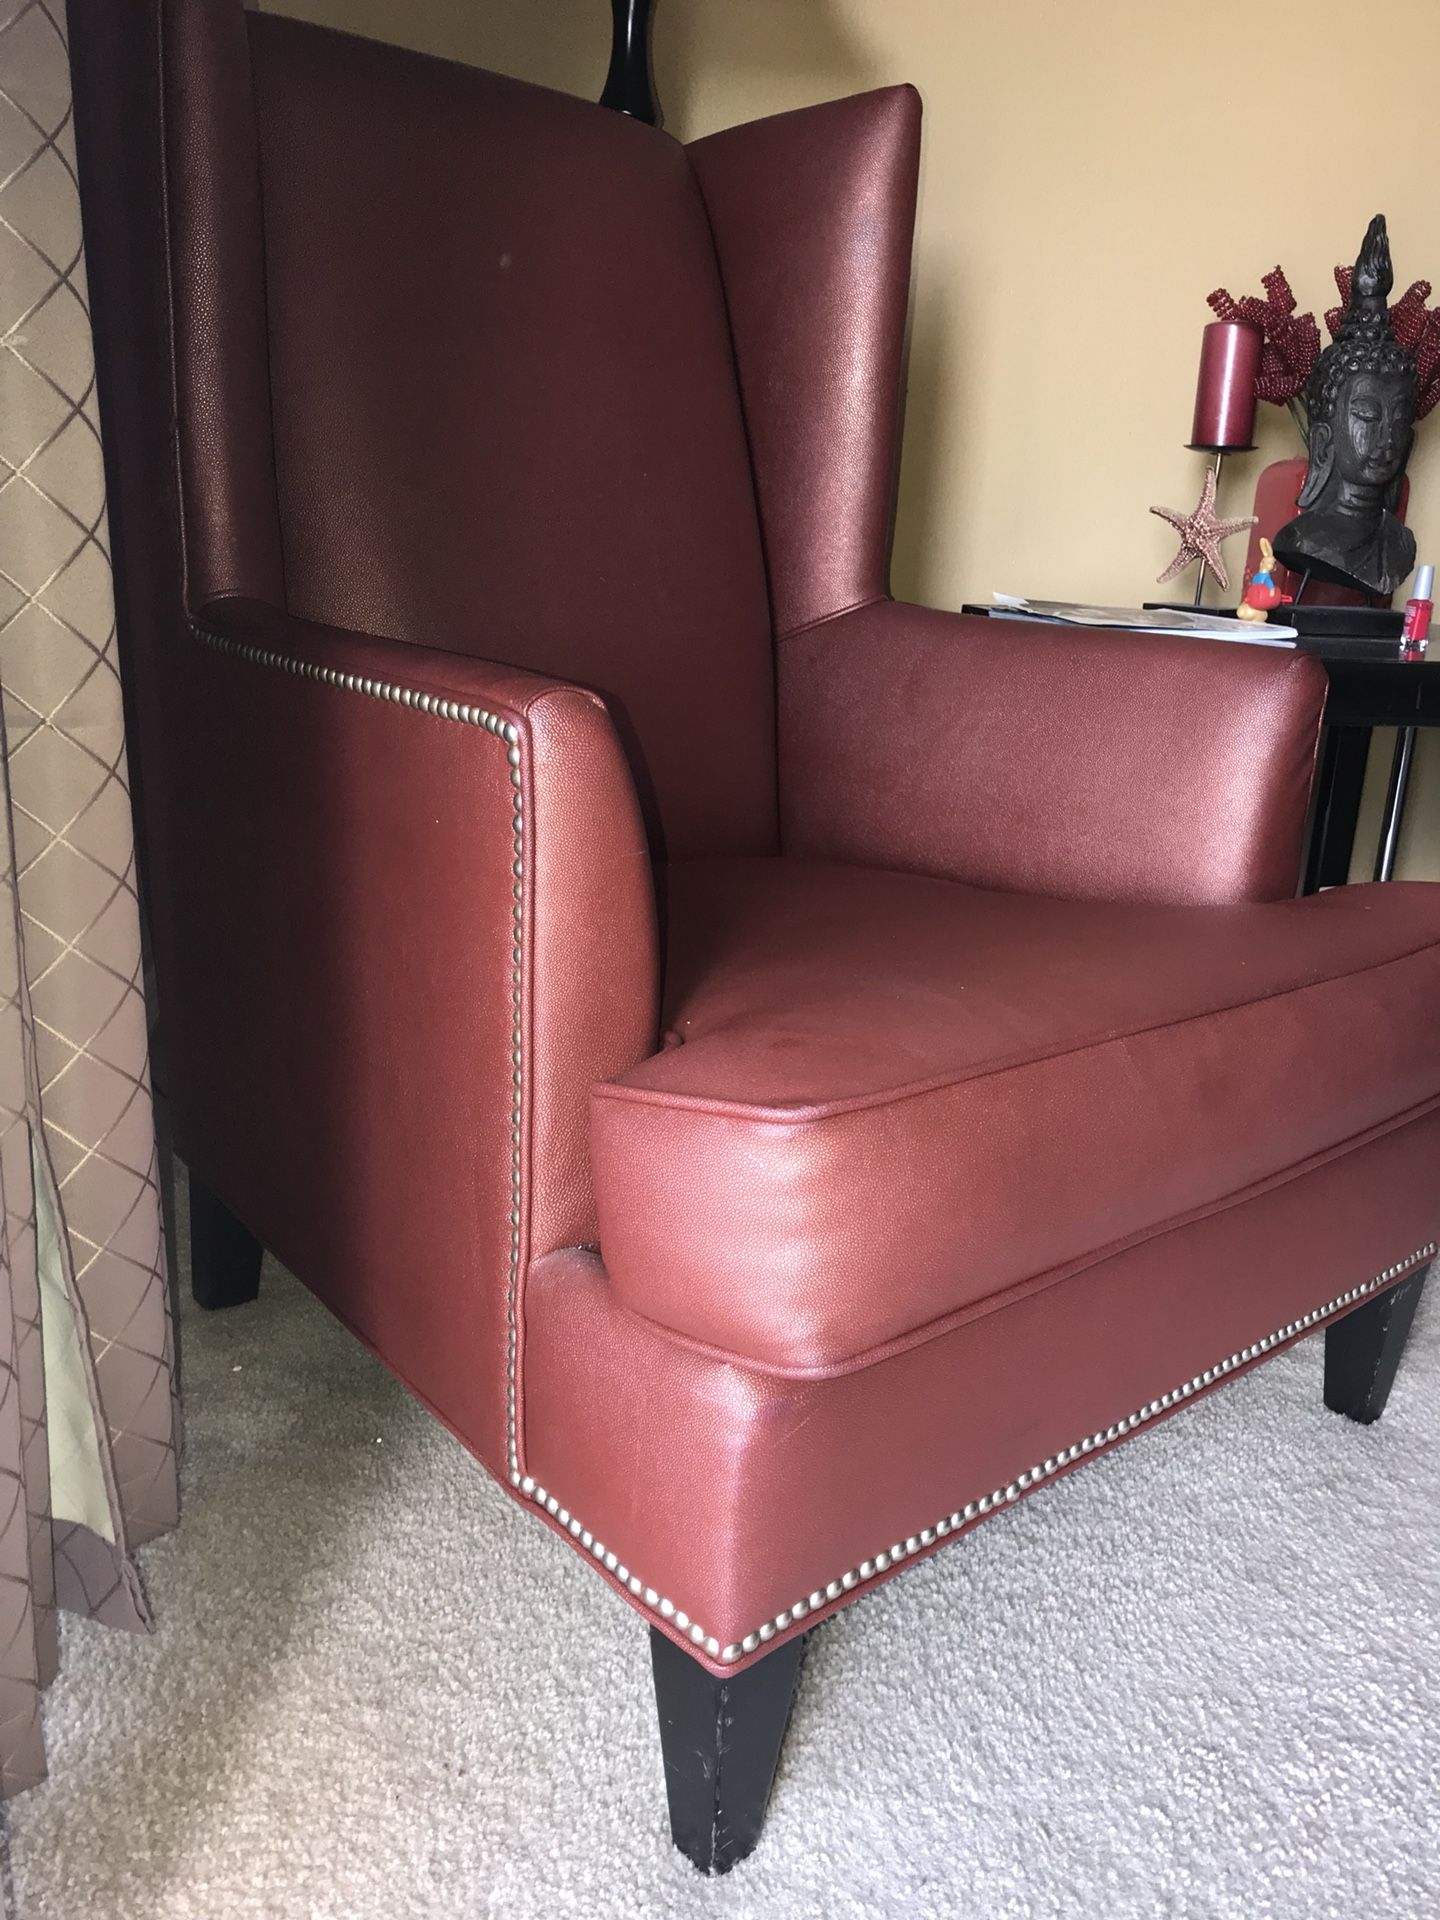 Terra cotta colored leather arm chair with studs